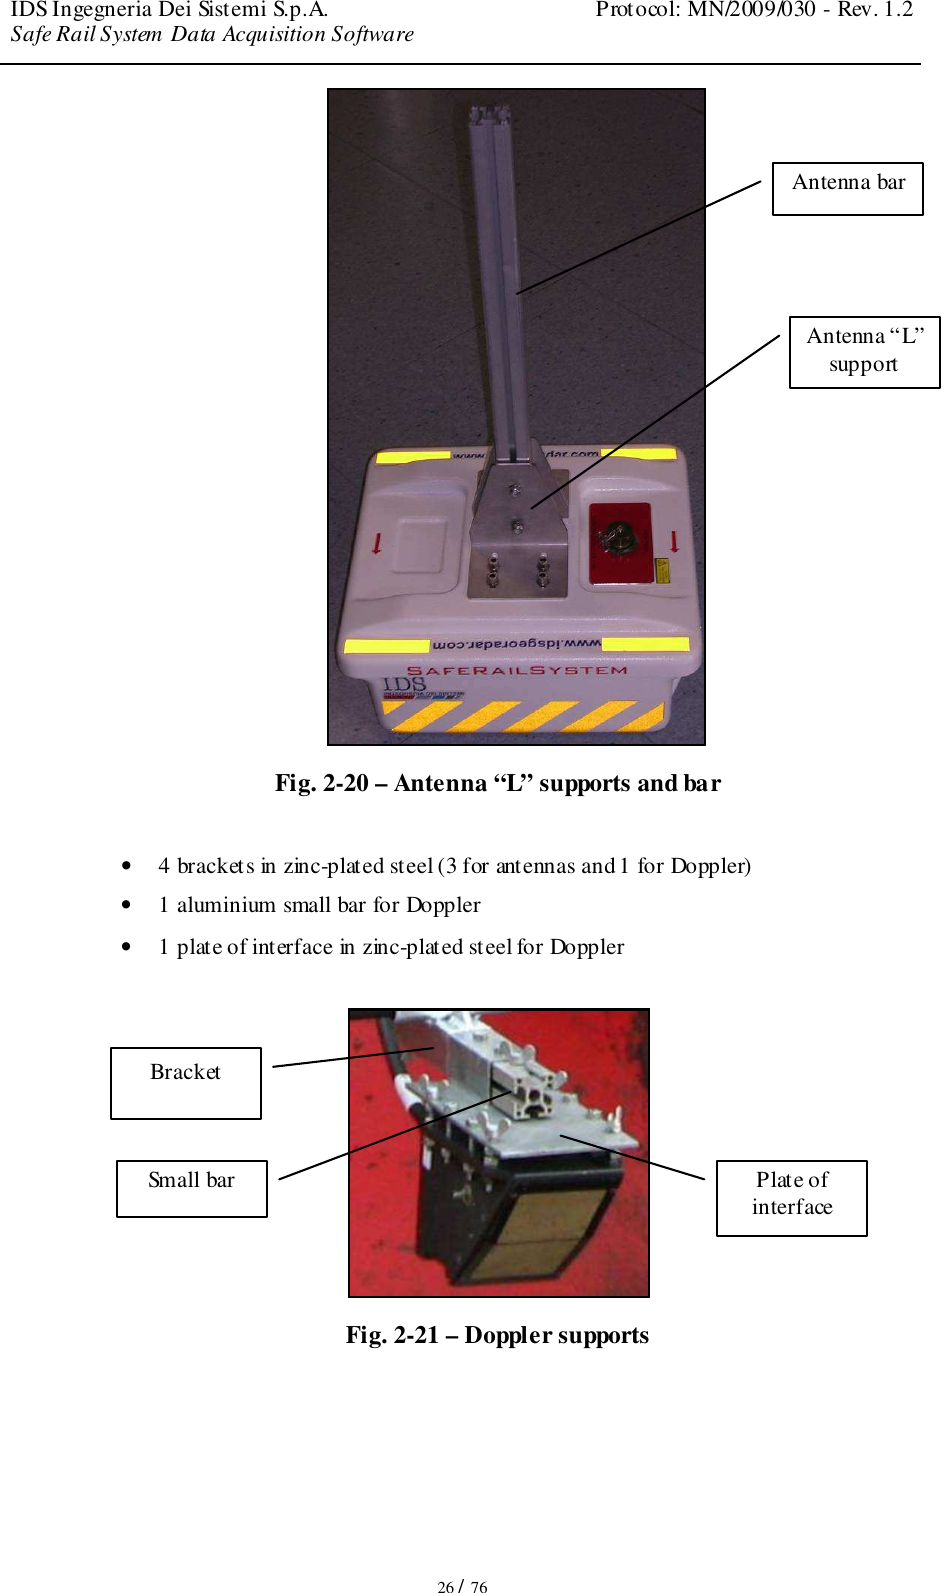 IDS Ingegneria Dei Sistemi S.p.A.  Protocol: MN/2009/030 - Rev. 1.2 Safe Rail System Data Acquisition Software   26 / 76  Fig. 2-20 – Antenna “L” supports and bar  • 4 brackets in zinc-plated steel (3 for antennas and 1 for Doppler) • 1 aluminium small bar for Doppler • 1 plate of interface in zinc-plated steel for Doppler   Fig. 2-21 – Doppler supports Antenna “L” support Antenna bar Bracket Small bar Plate of interface 